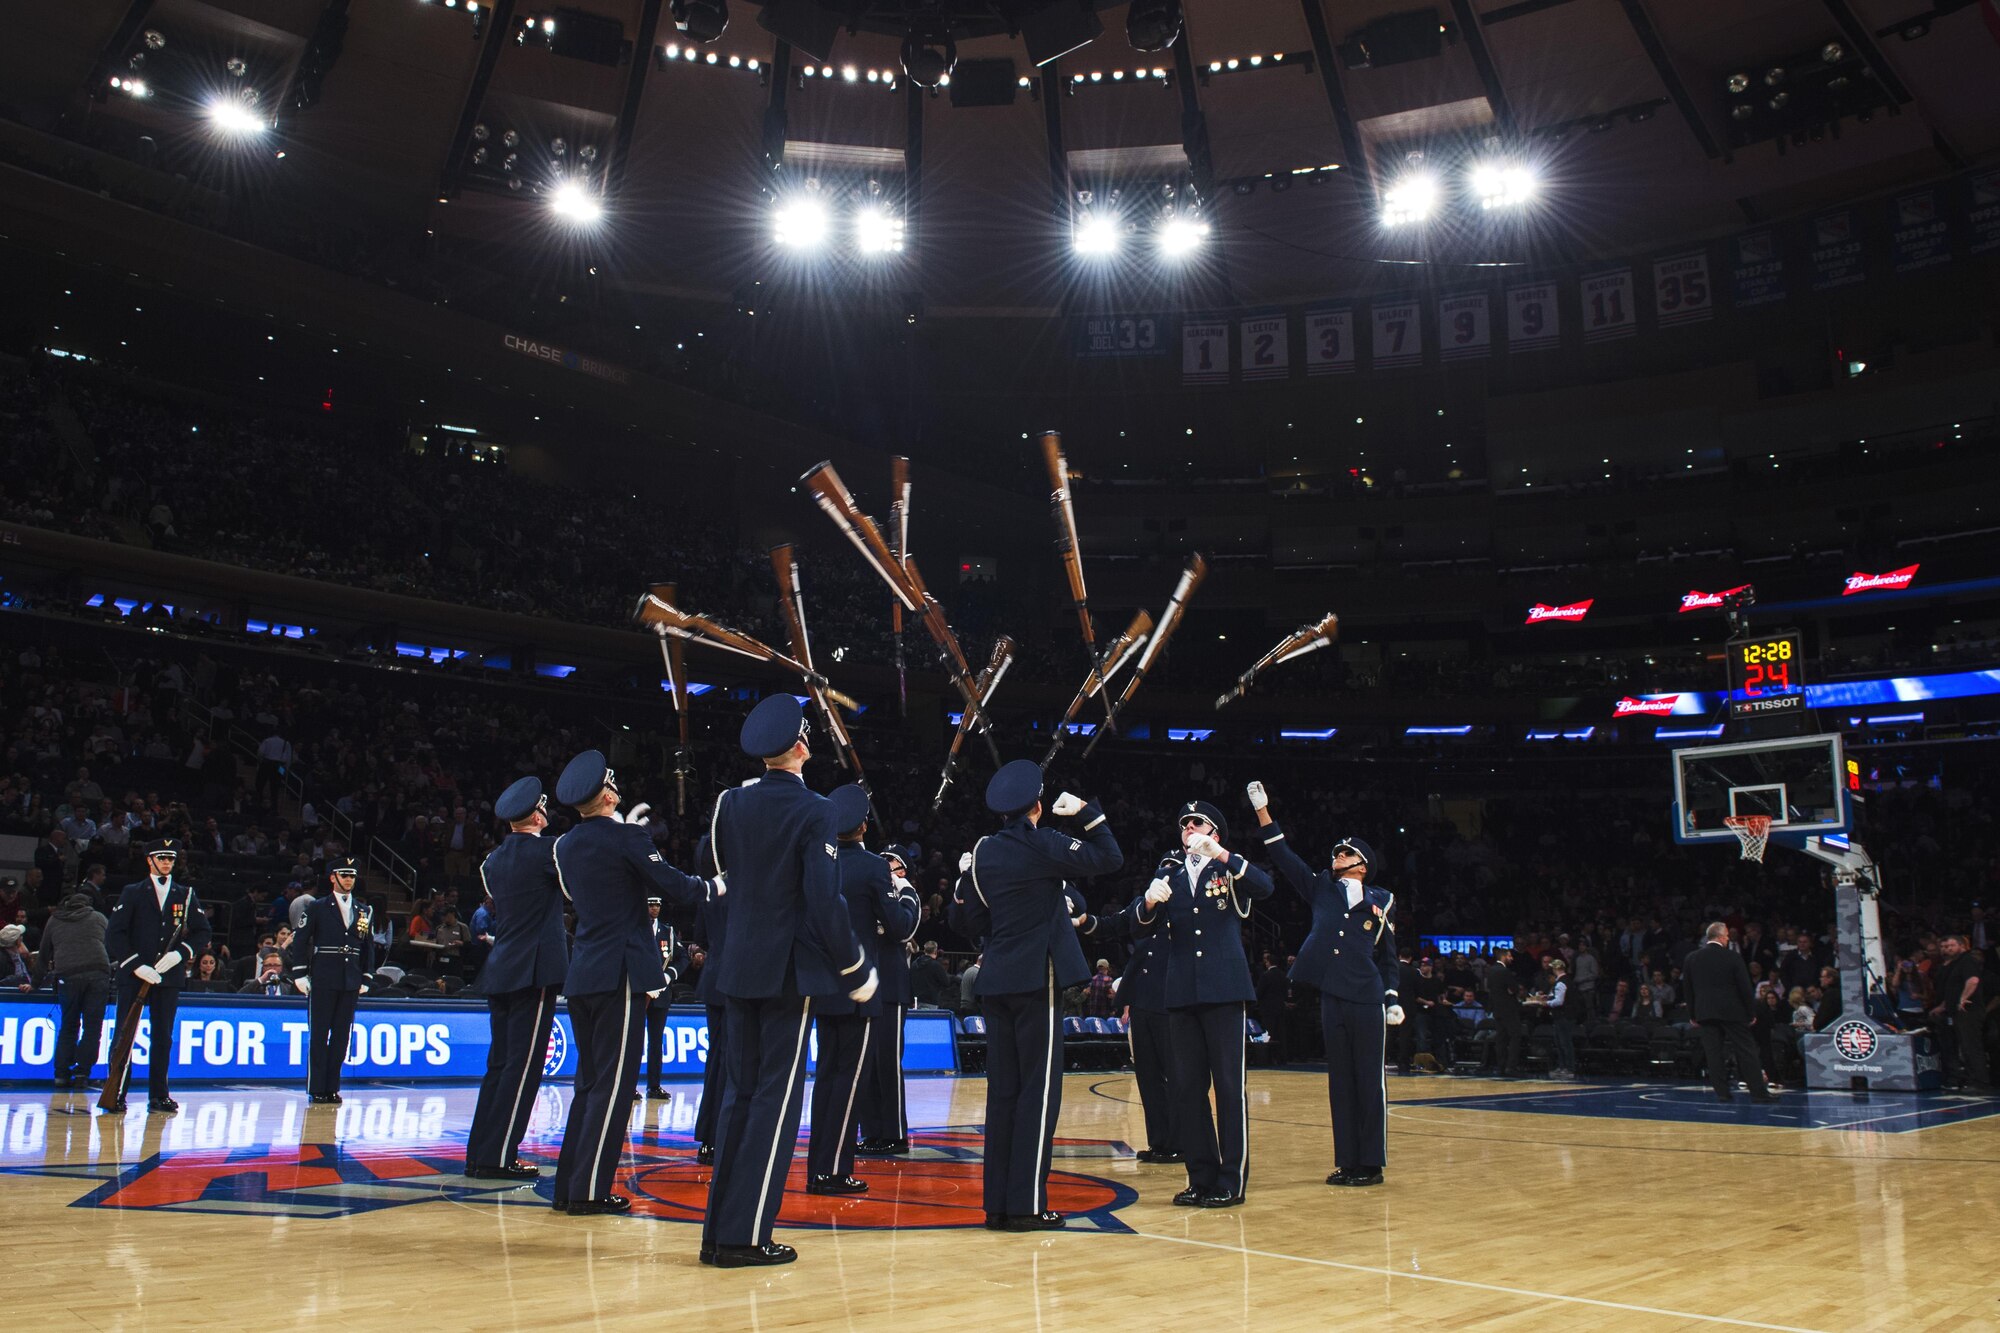 Members of the U.S. Air Force Honor Guard Drill Team perform a 12-man routine during halftime of the New York Knicks game at Madison Square Garden in New York, Nov. 9, 2016. The drill team showcased their skills in precision and weapon maneuvers in front of more than 19,000 people in the historic Madison Square Garden. (U.S. Air Force photo by Senior Airman Philip Bryant)